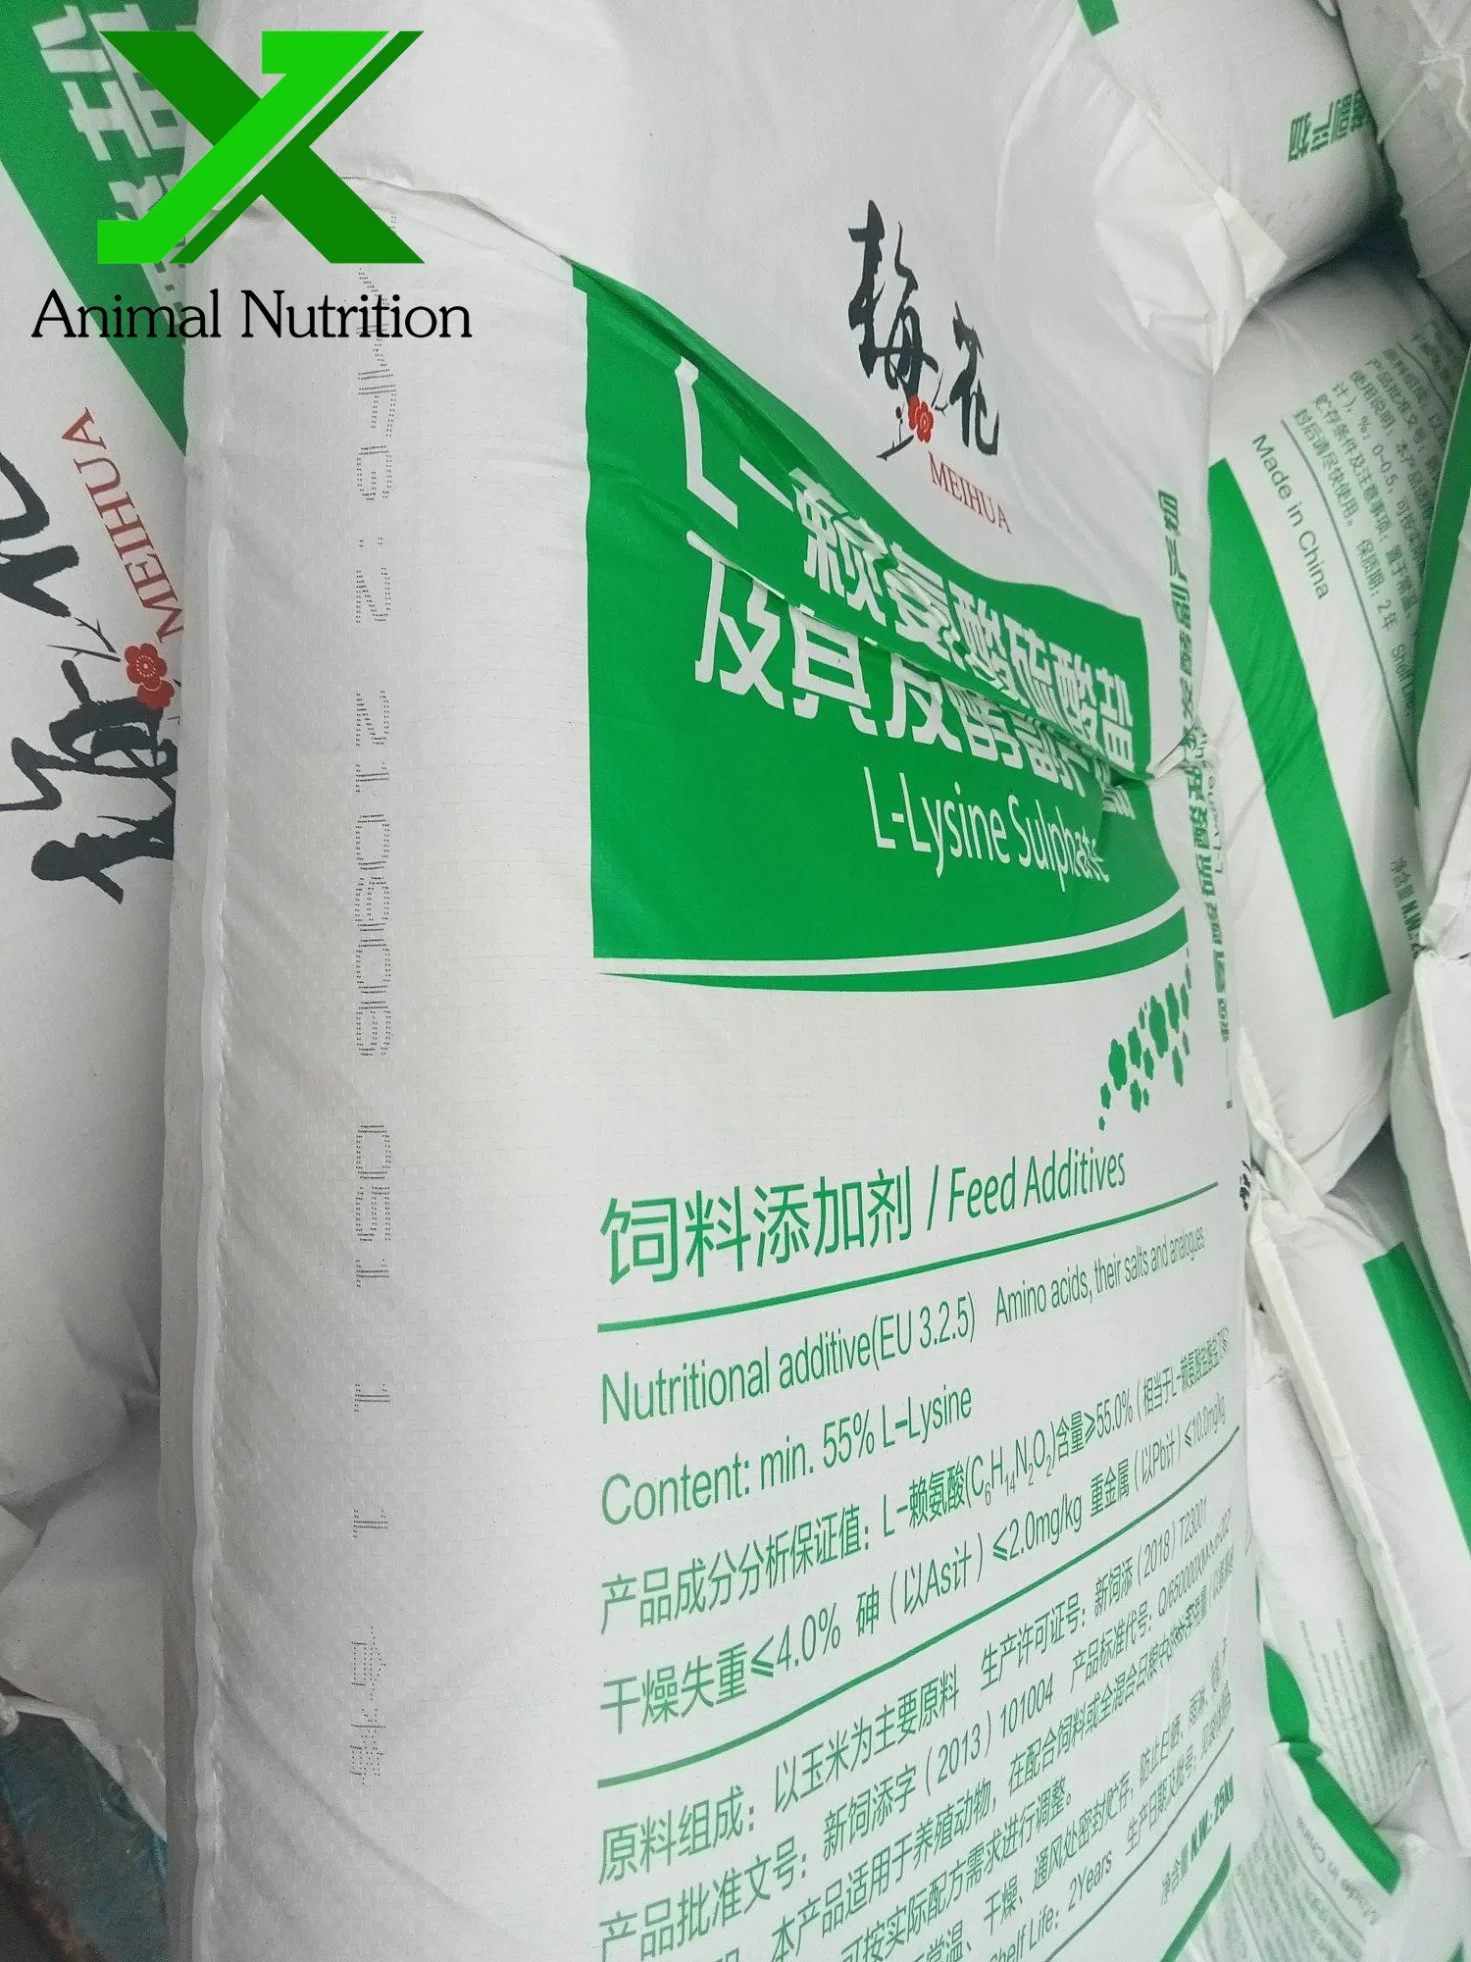 Meihua Brand L Lysine Sulphate/Sulfate 70% Animal Feed Additives for Dairy Cattle Feed